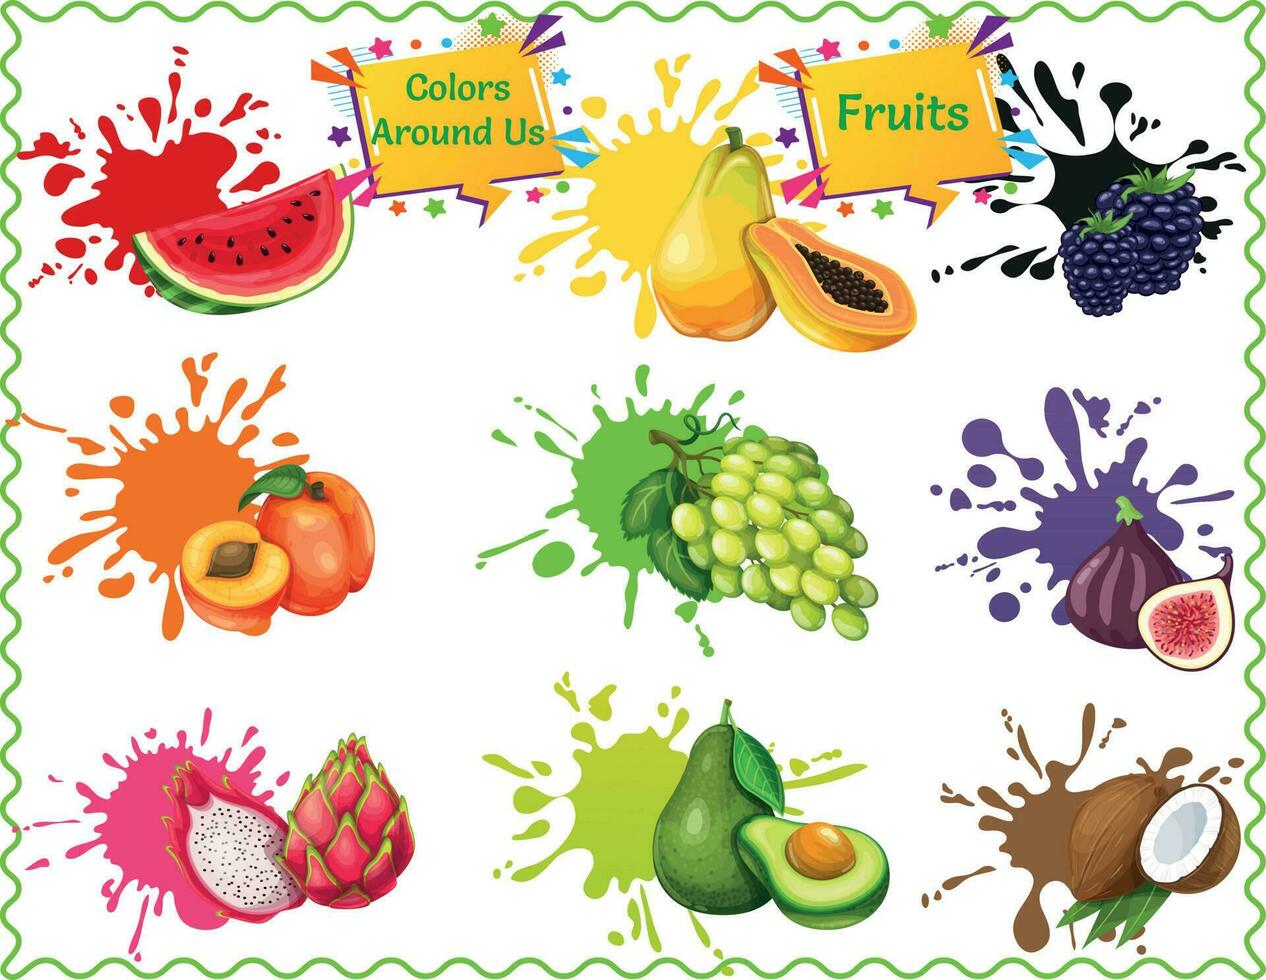 Kids' Fruits Poster, Eat In Color, Rainbow-inspired Nutrition Poster, Learn Fruits Poster Childrens, Wall Chart Educational Childs vector